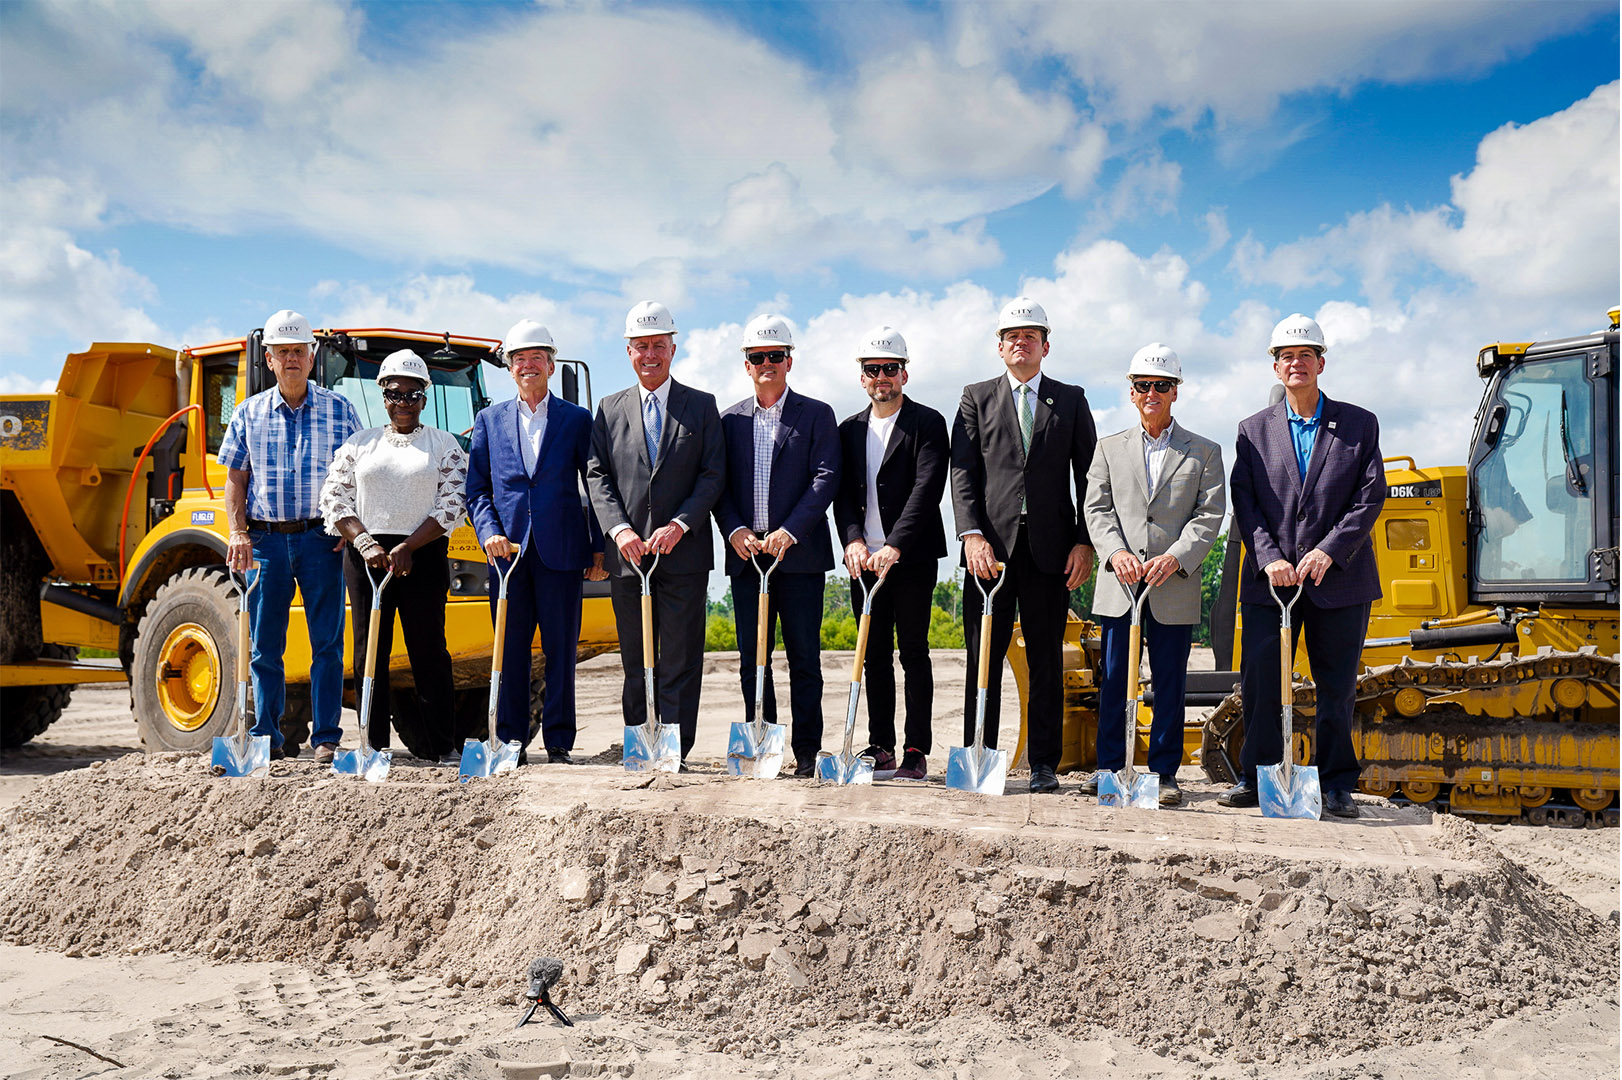 ARCO Breaks Ground on 1.2 Million Square Foot Distribution Facility & Showroom for CITY Furniture